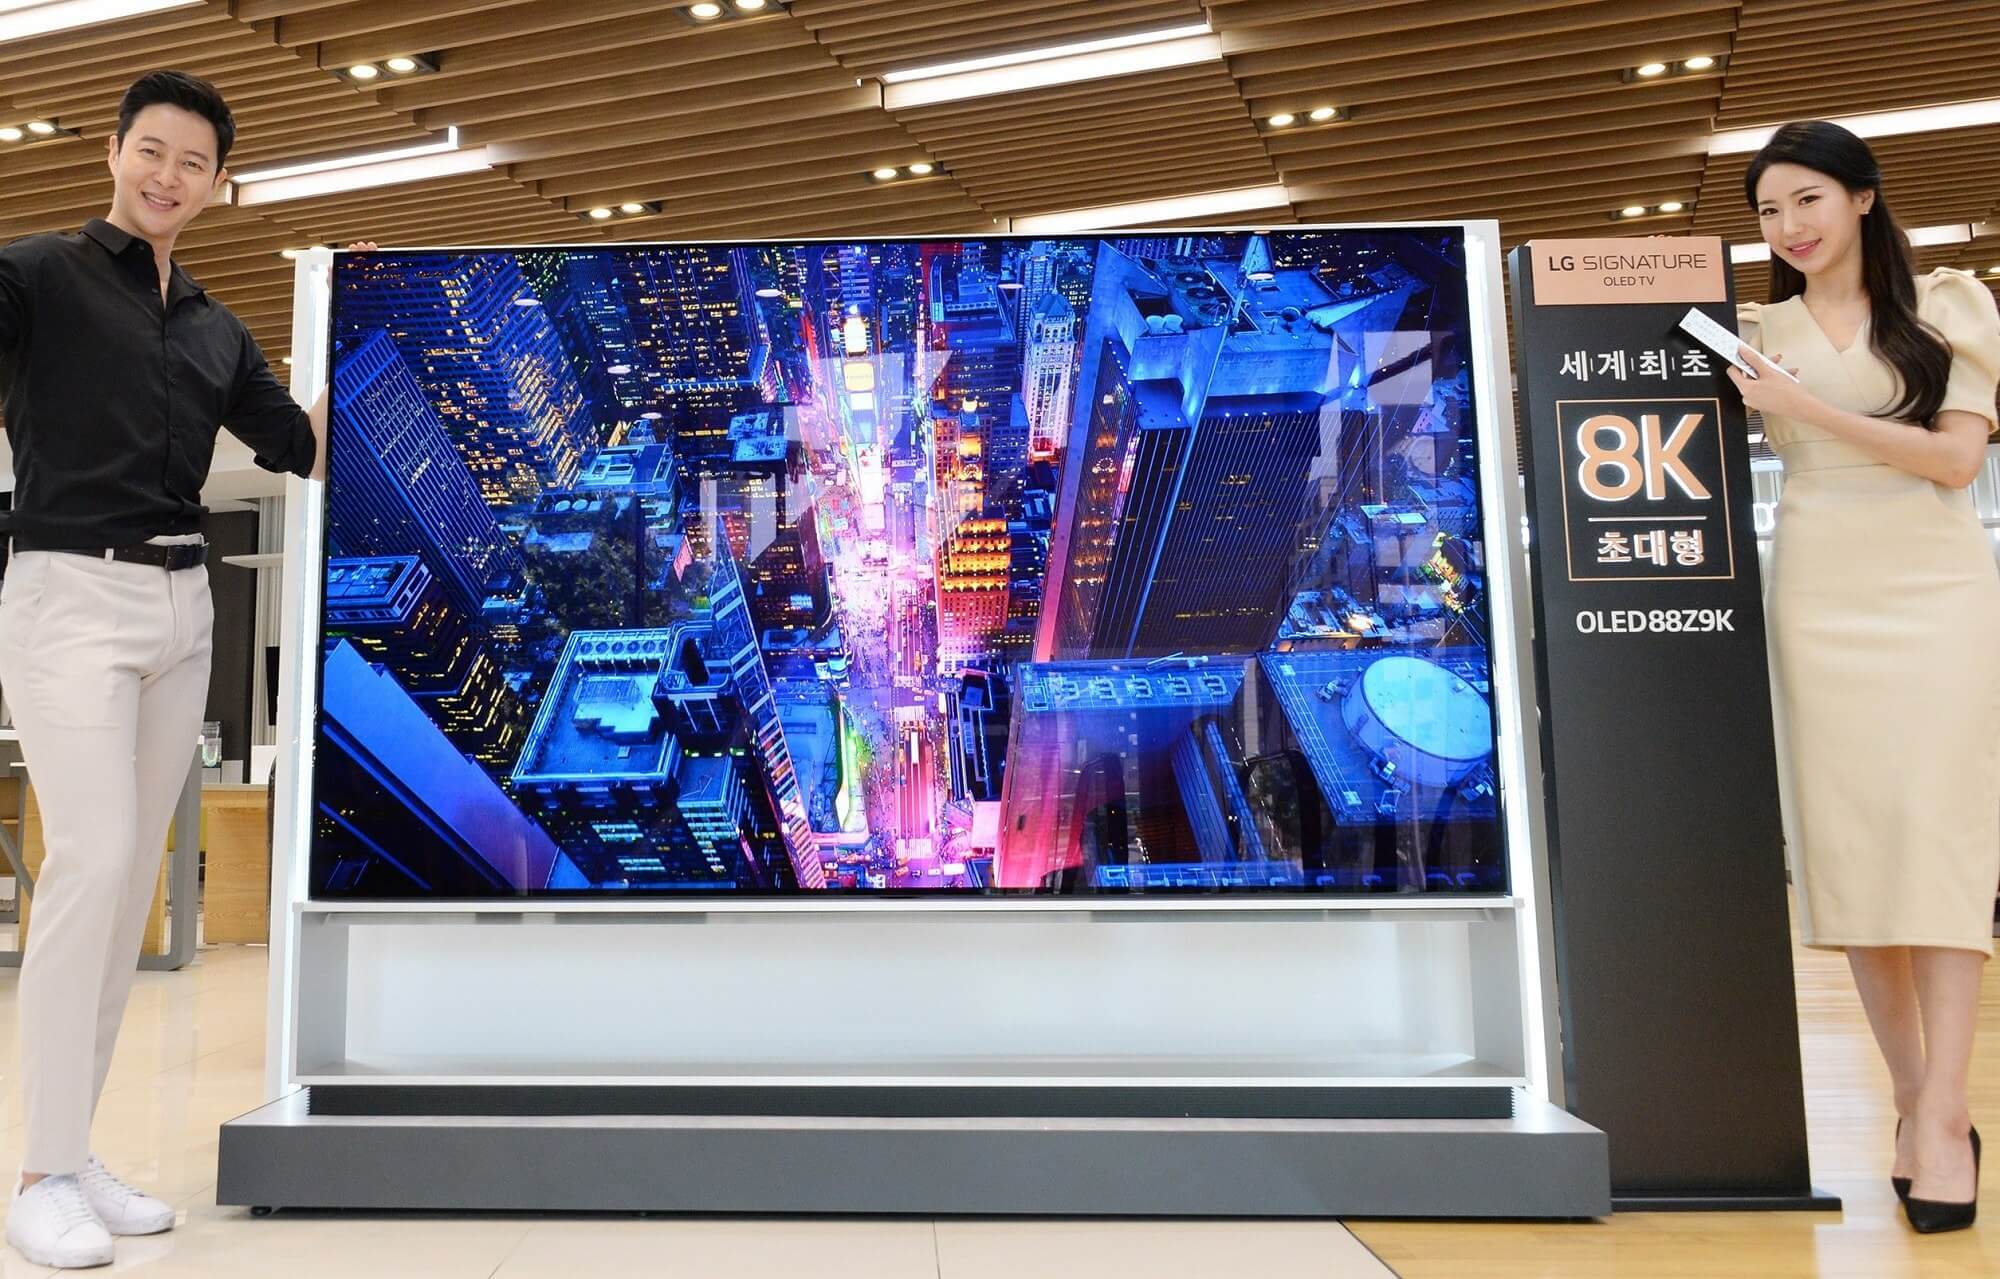 Industry group defines performance specifications for 8K televisions